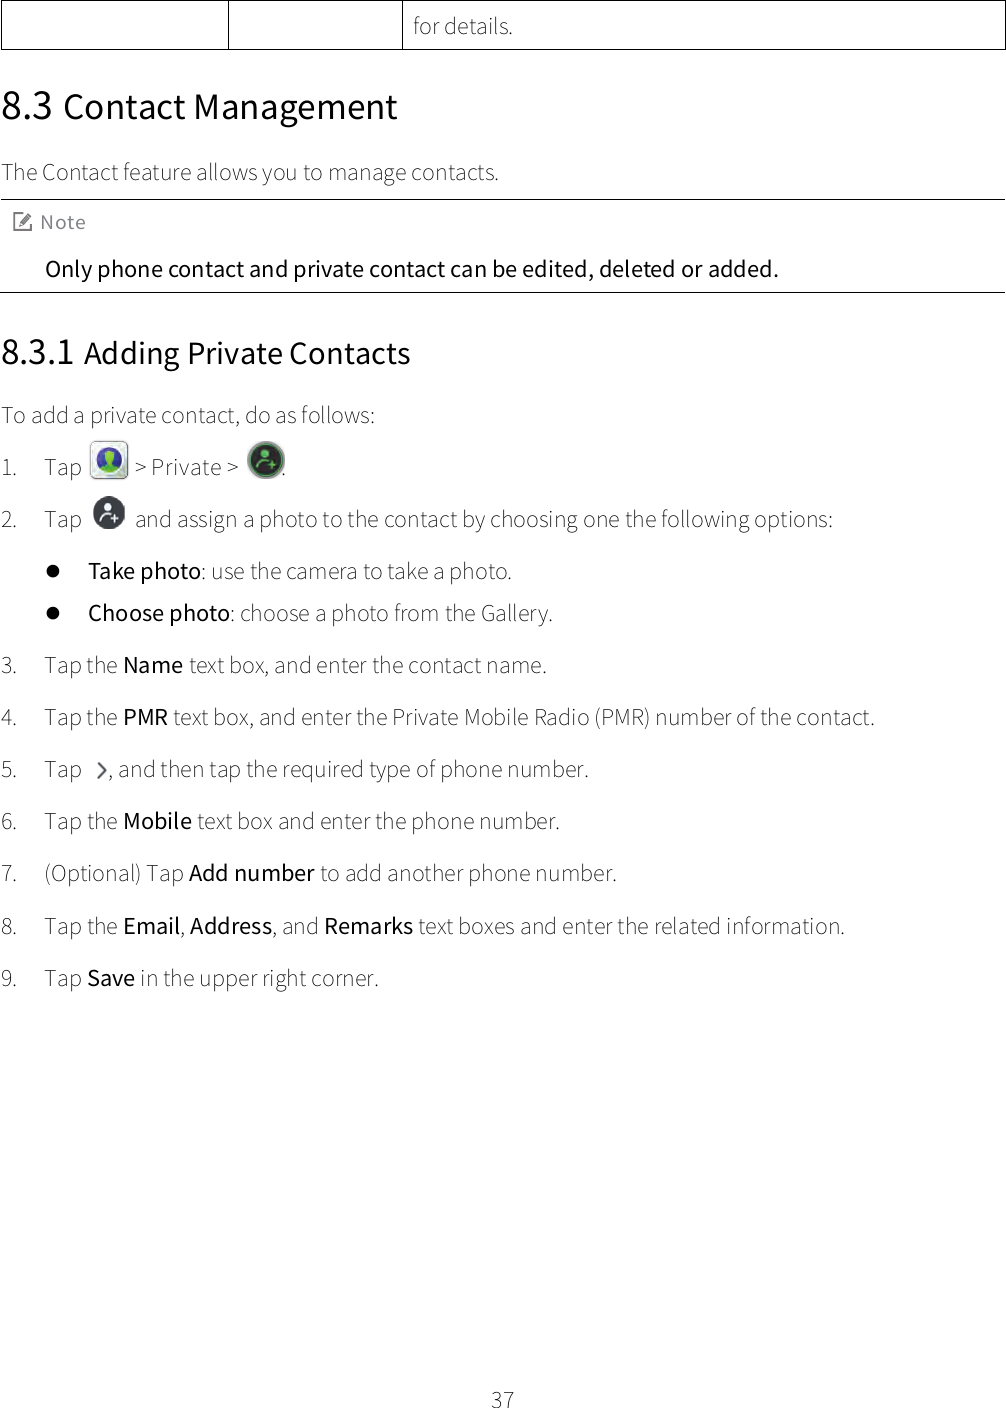    37  for details. 8.3 Contact Management The Contact feature allows you to manage contacts. Note Only phone contact and private contact can be edited, deleted or added. 8.3.1 Adding Private Contacts To add a private contact, do as follows: 1. Tap   &gt; Private &gt;  . 2. Tap  and assign a photo to the contact by choosing one the following options:  Take photo: use the camera to take a photo.  Choose photo: choose a photo from the Gallery. 3. Tap the Name text box, and enter the contact name. 4. Tap the PMR text box, and enter the Private Mobile Radio (PMR) number of the contact. 5. Tap  , and then tap the required type of phone number. 6. Tap the Mobile text box and enter the phone number. 7. (Optional) Tap Add number to add another phone number. 8. Tap the Email, Address, and Remarks text boxes and enter the related information. 9. Tap Save in the upper right corner. 